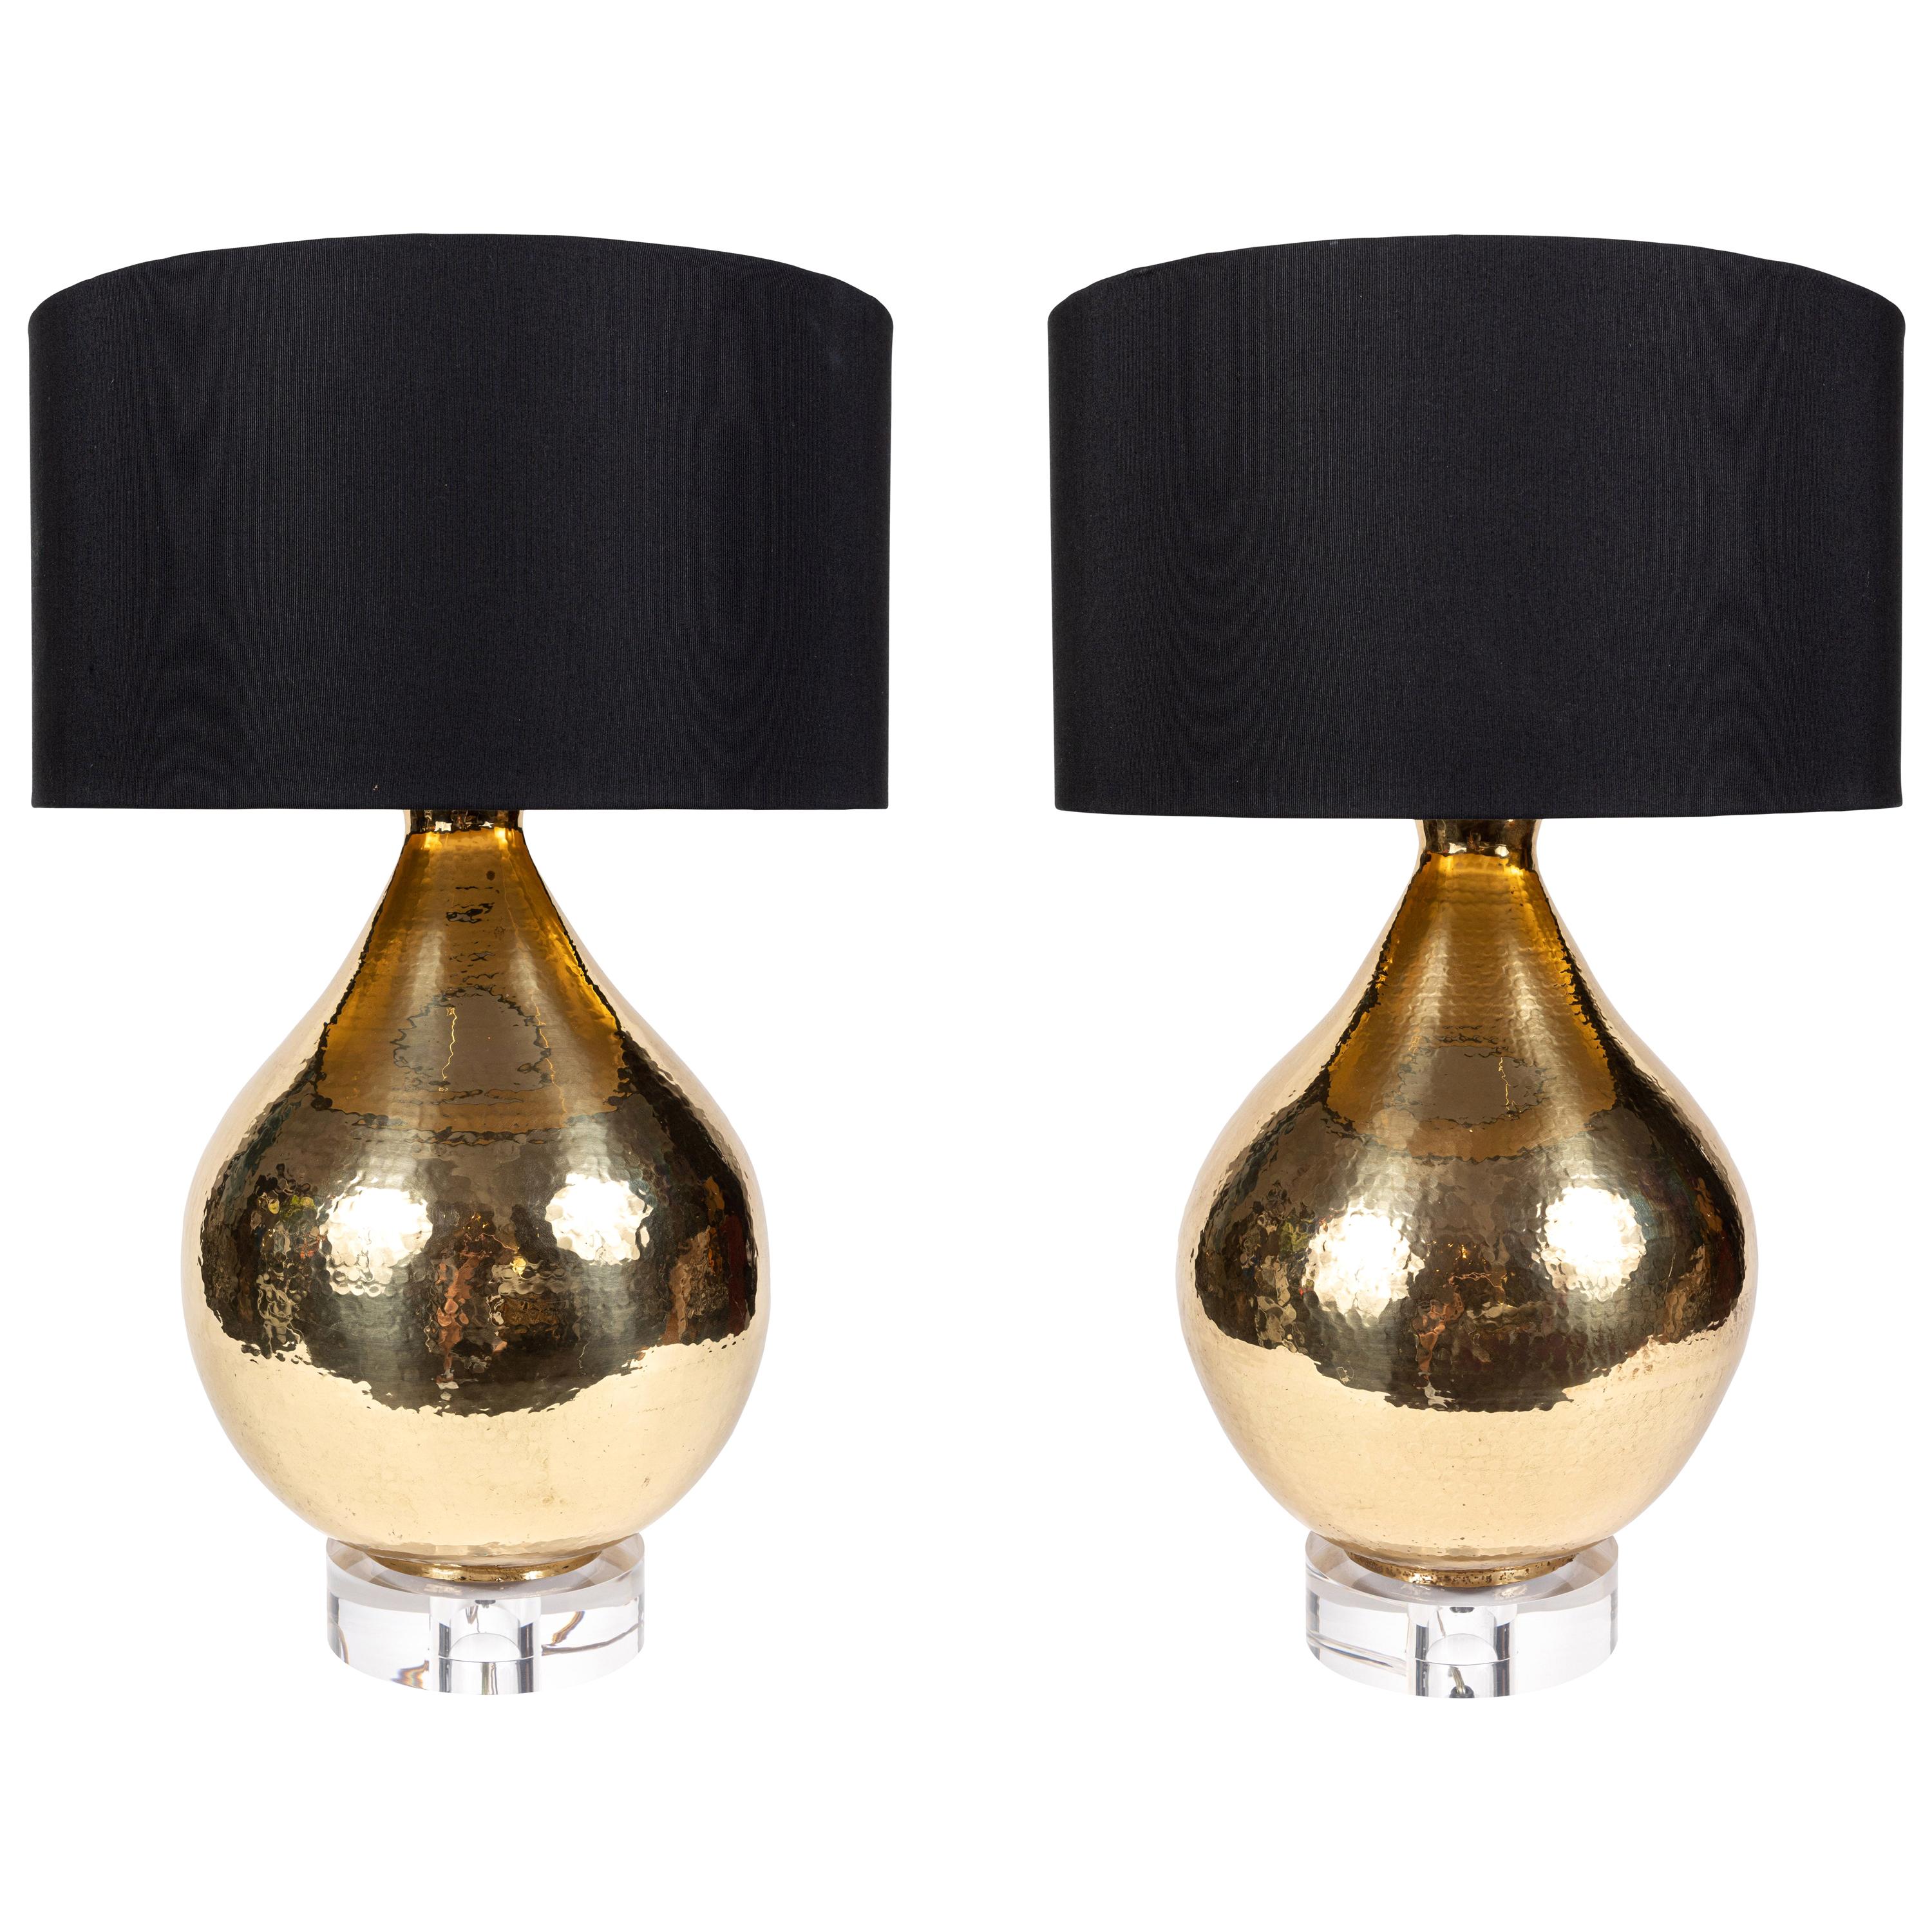 Pair of Midcentury Hammered Brass Lamps on Lucite Bases Attributed to Marbro